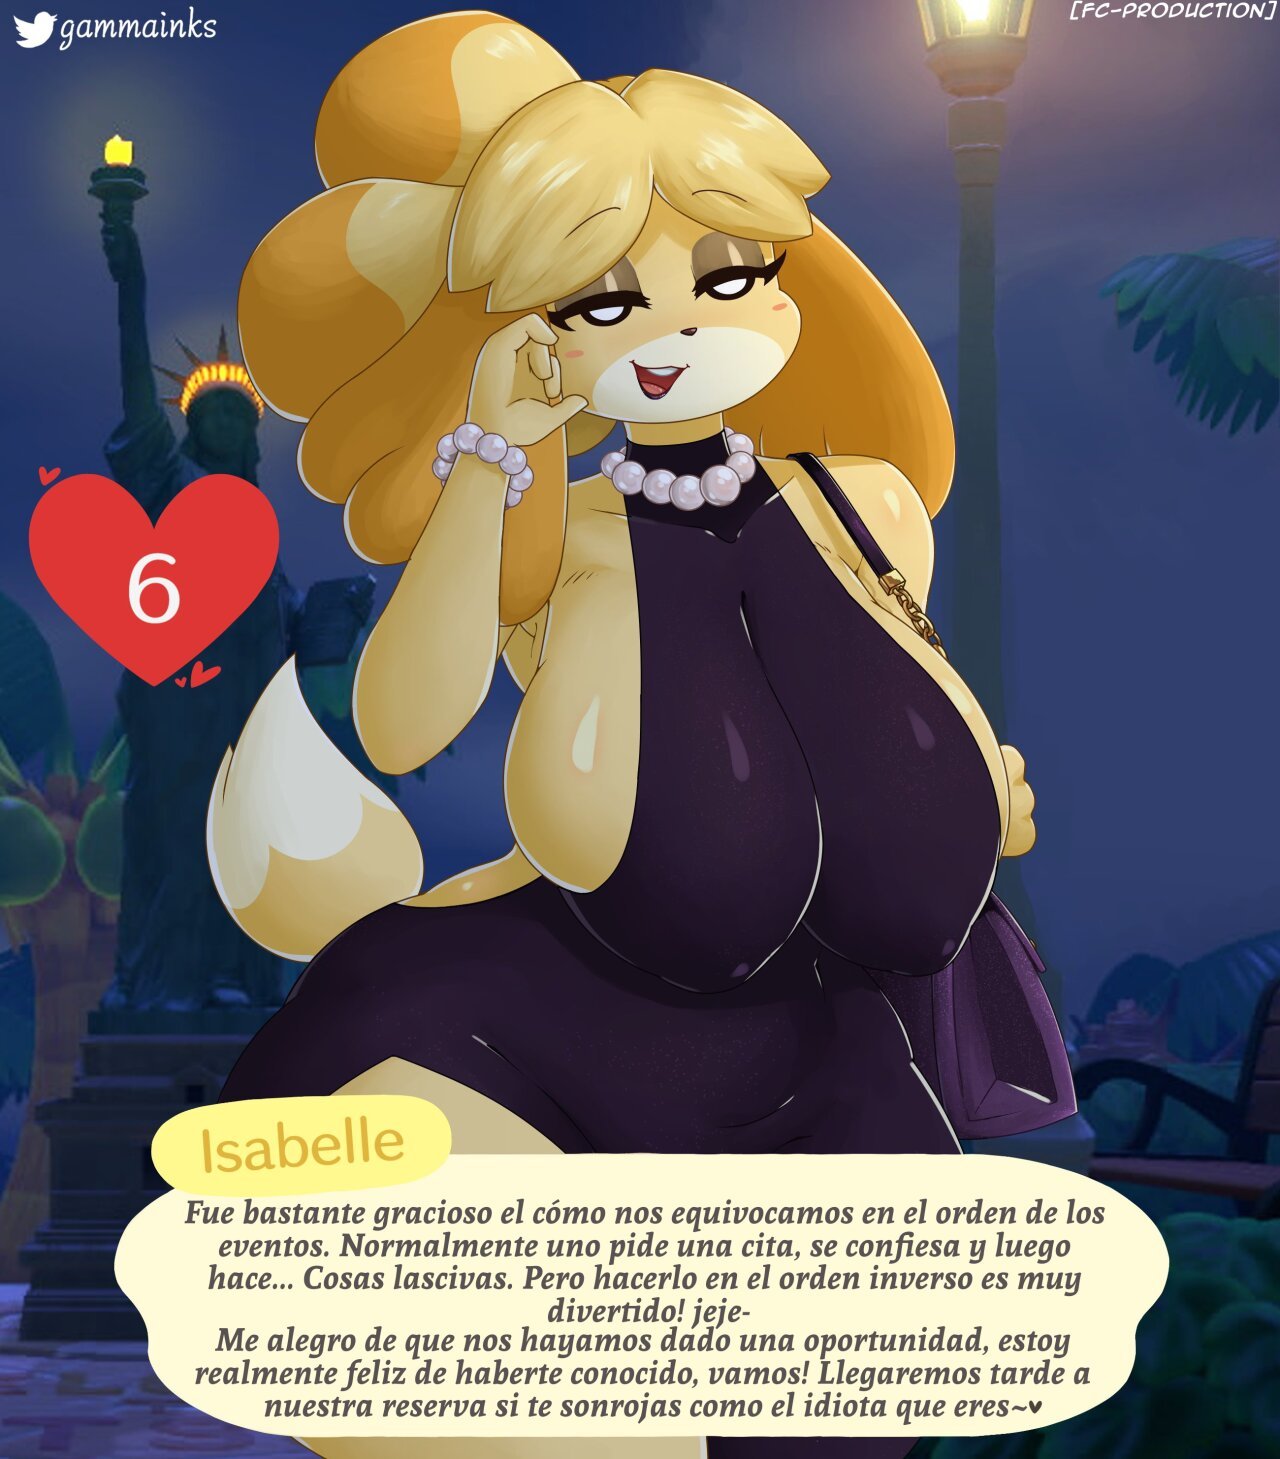 Bonding with Isabelle &#91;Spanish&#93;&#91;Español&#93;&#91;Fc-Production&#93;&#91;Furry&#93; - 7